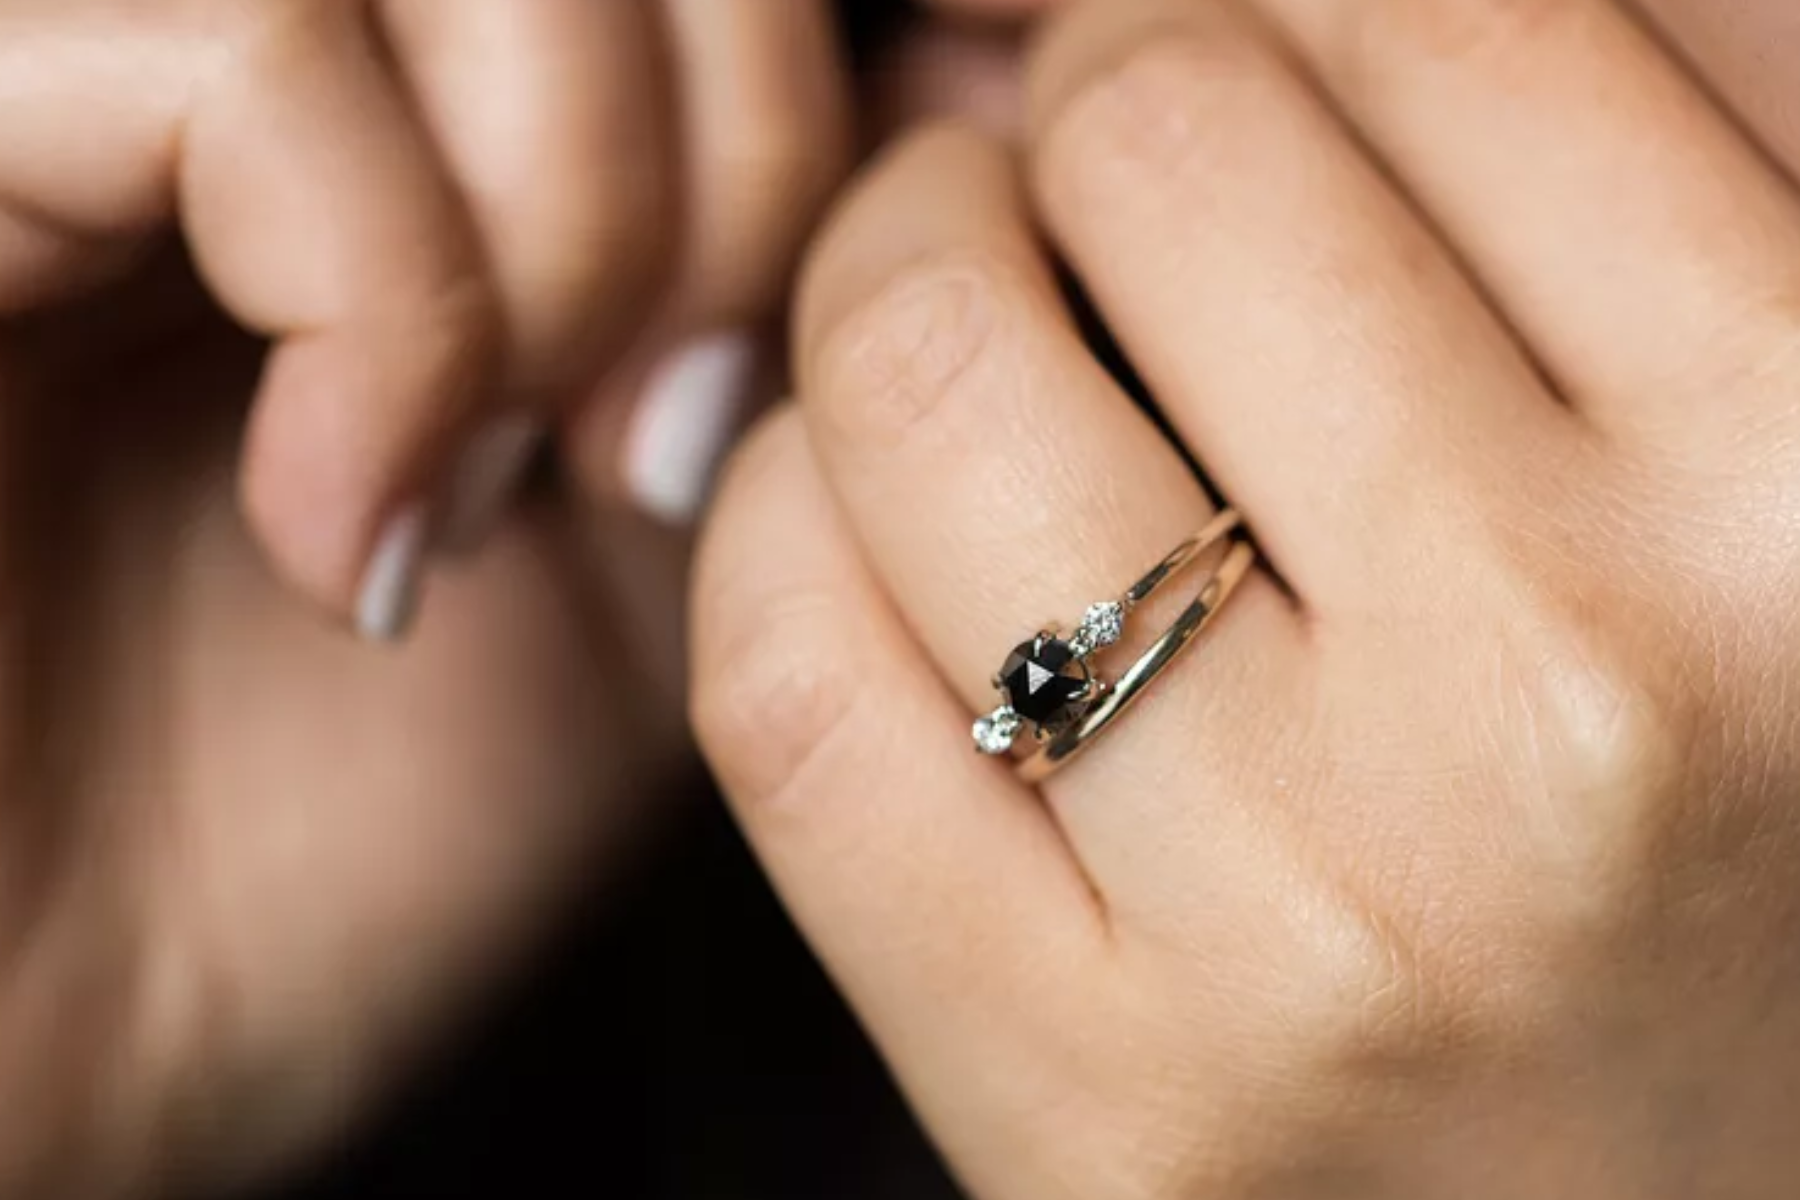 Black Diamond Engagement Rings - A Smart Investment